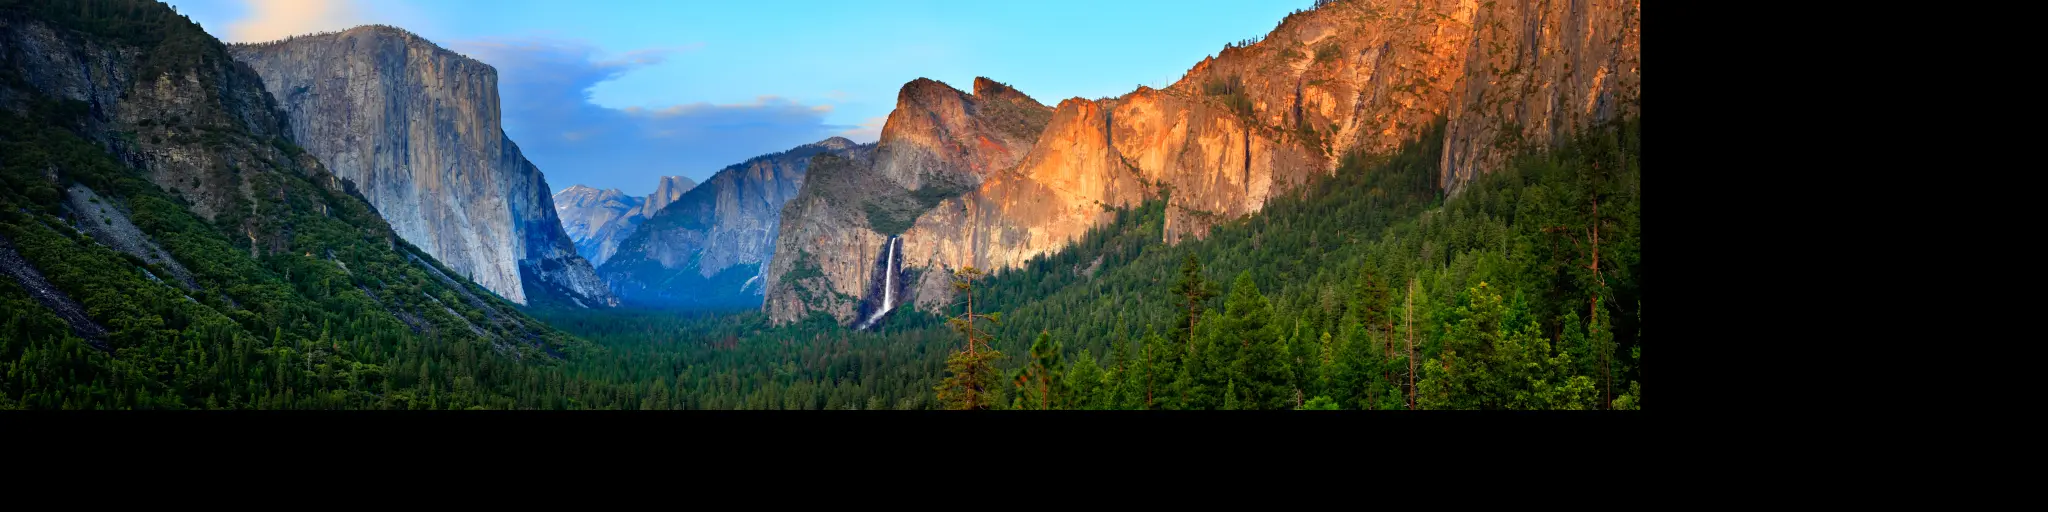 Evening view of the Yosemite Valley at Sunset from Tunnel View, California National Park